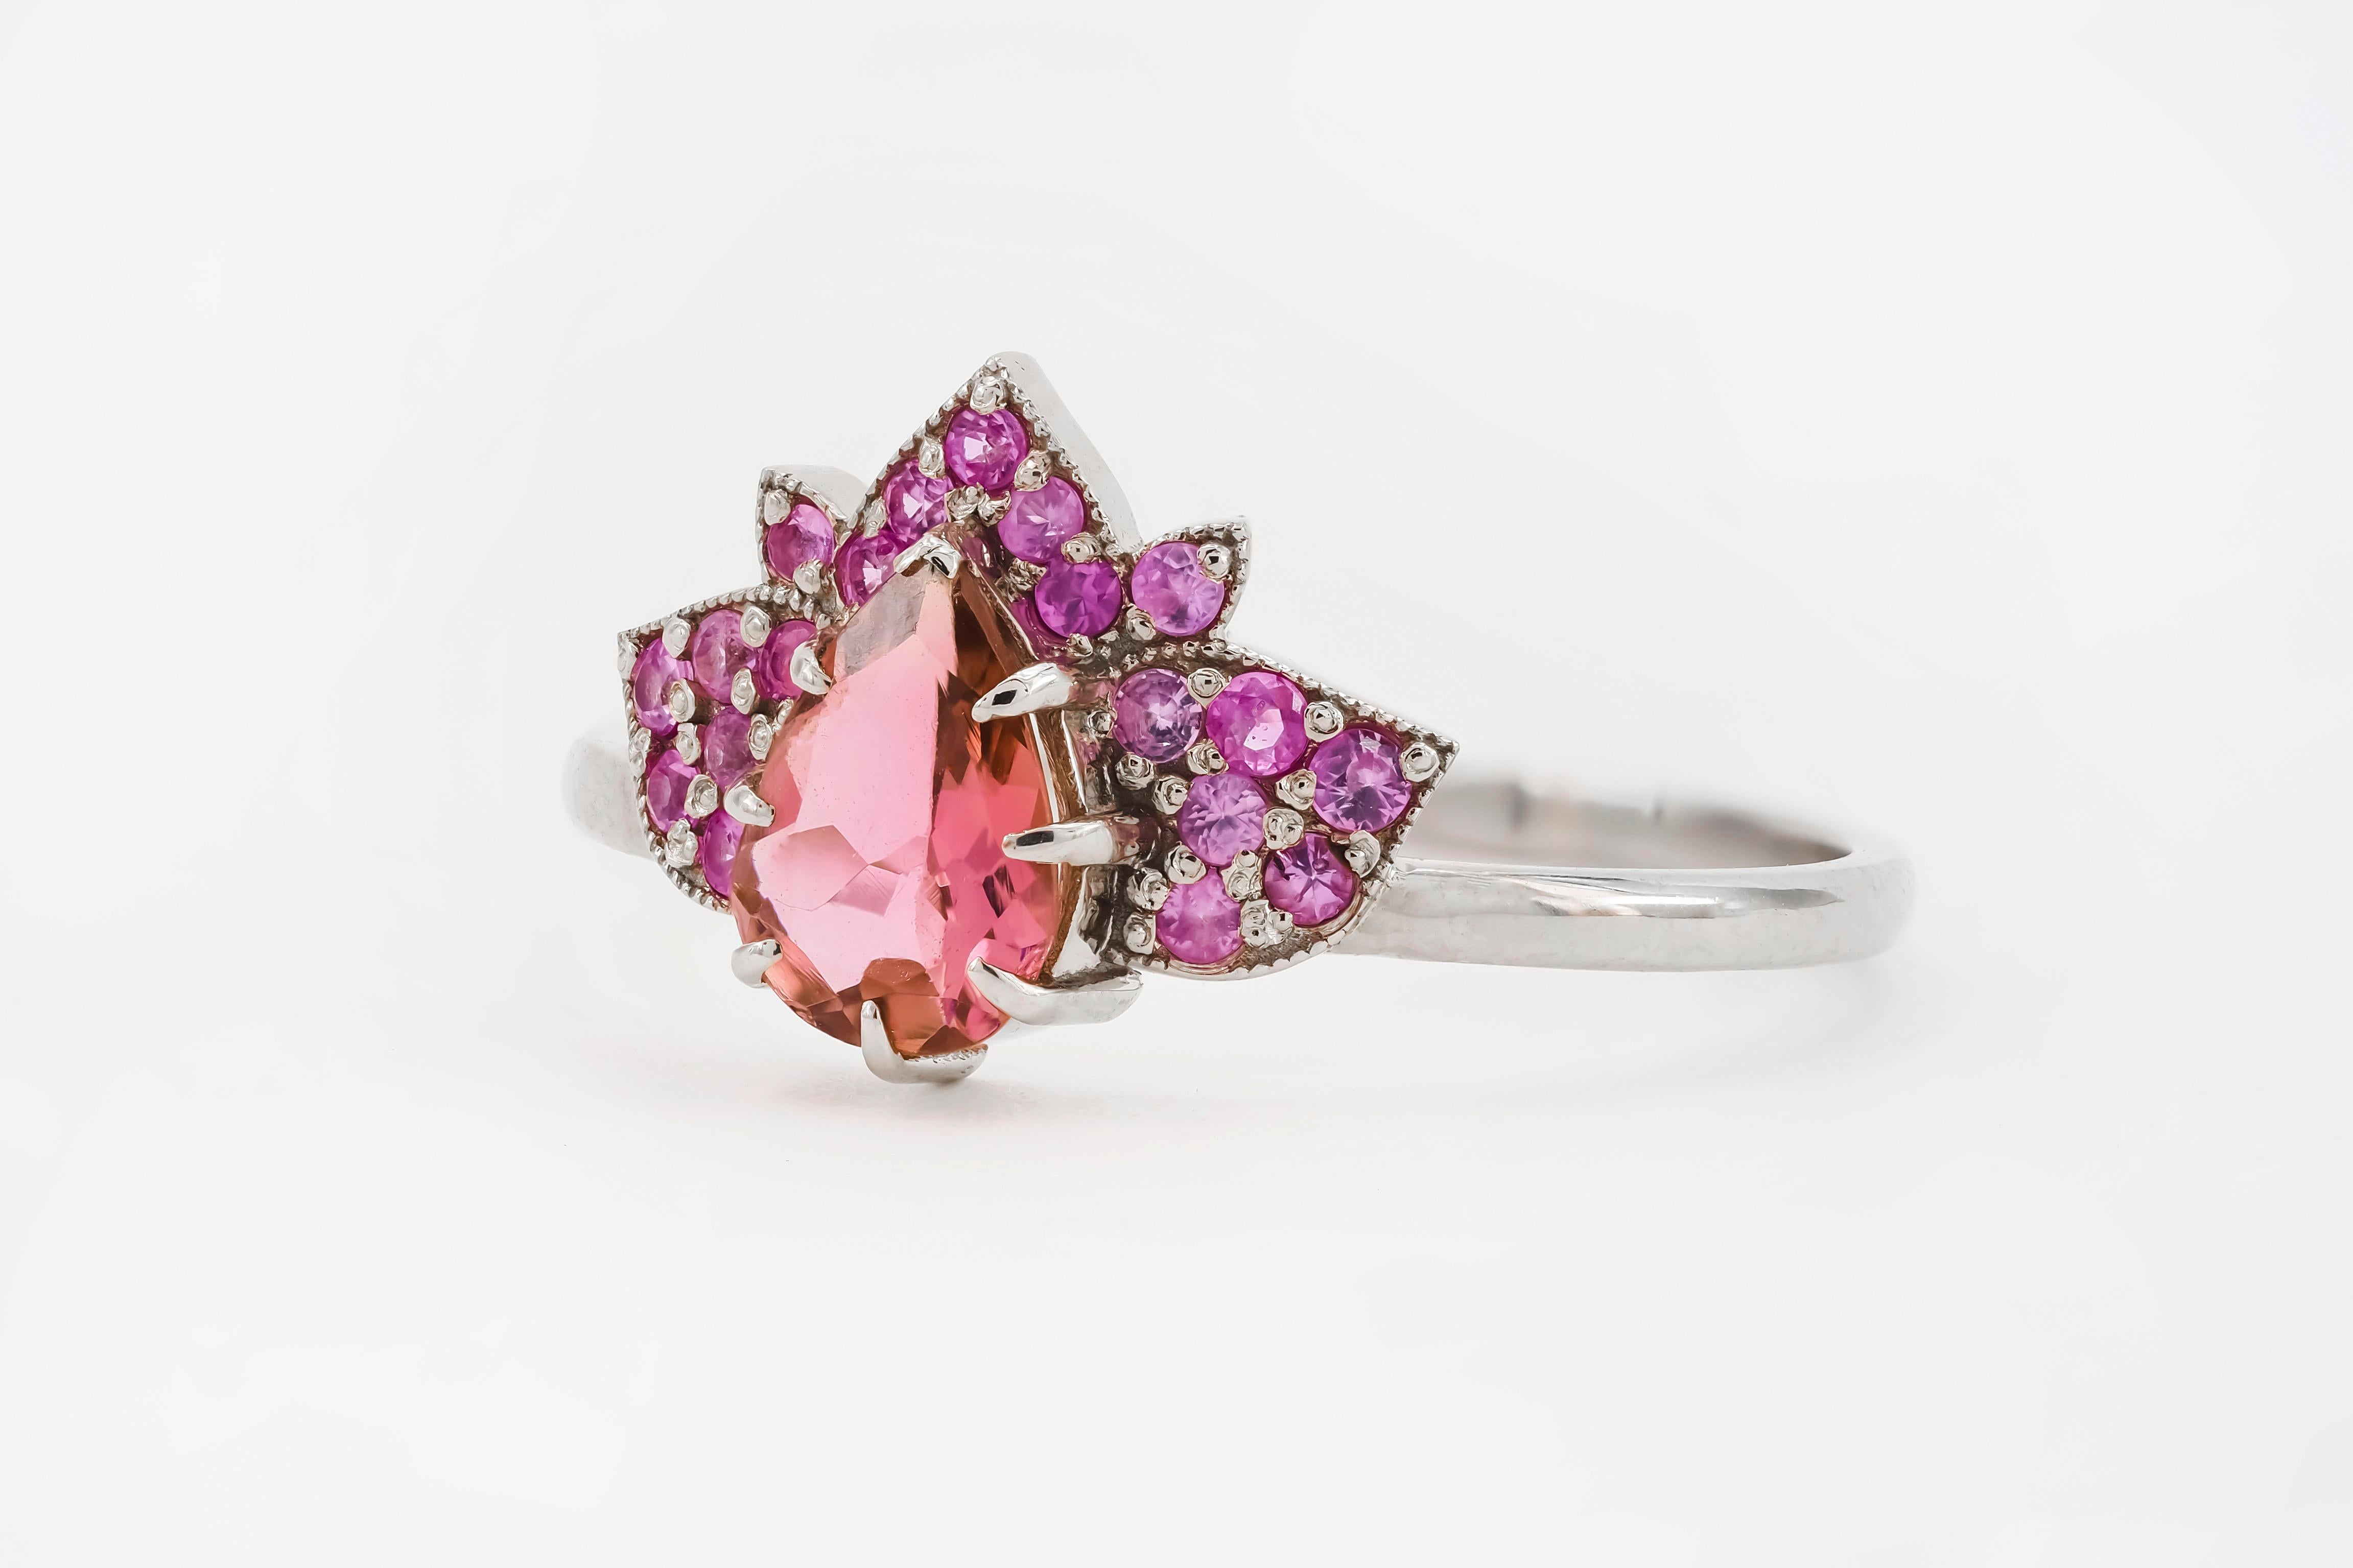 For Sale:  14 karat gold Lotus ring with pink tourmaline and sapphires 4